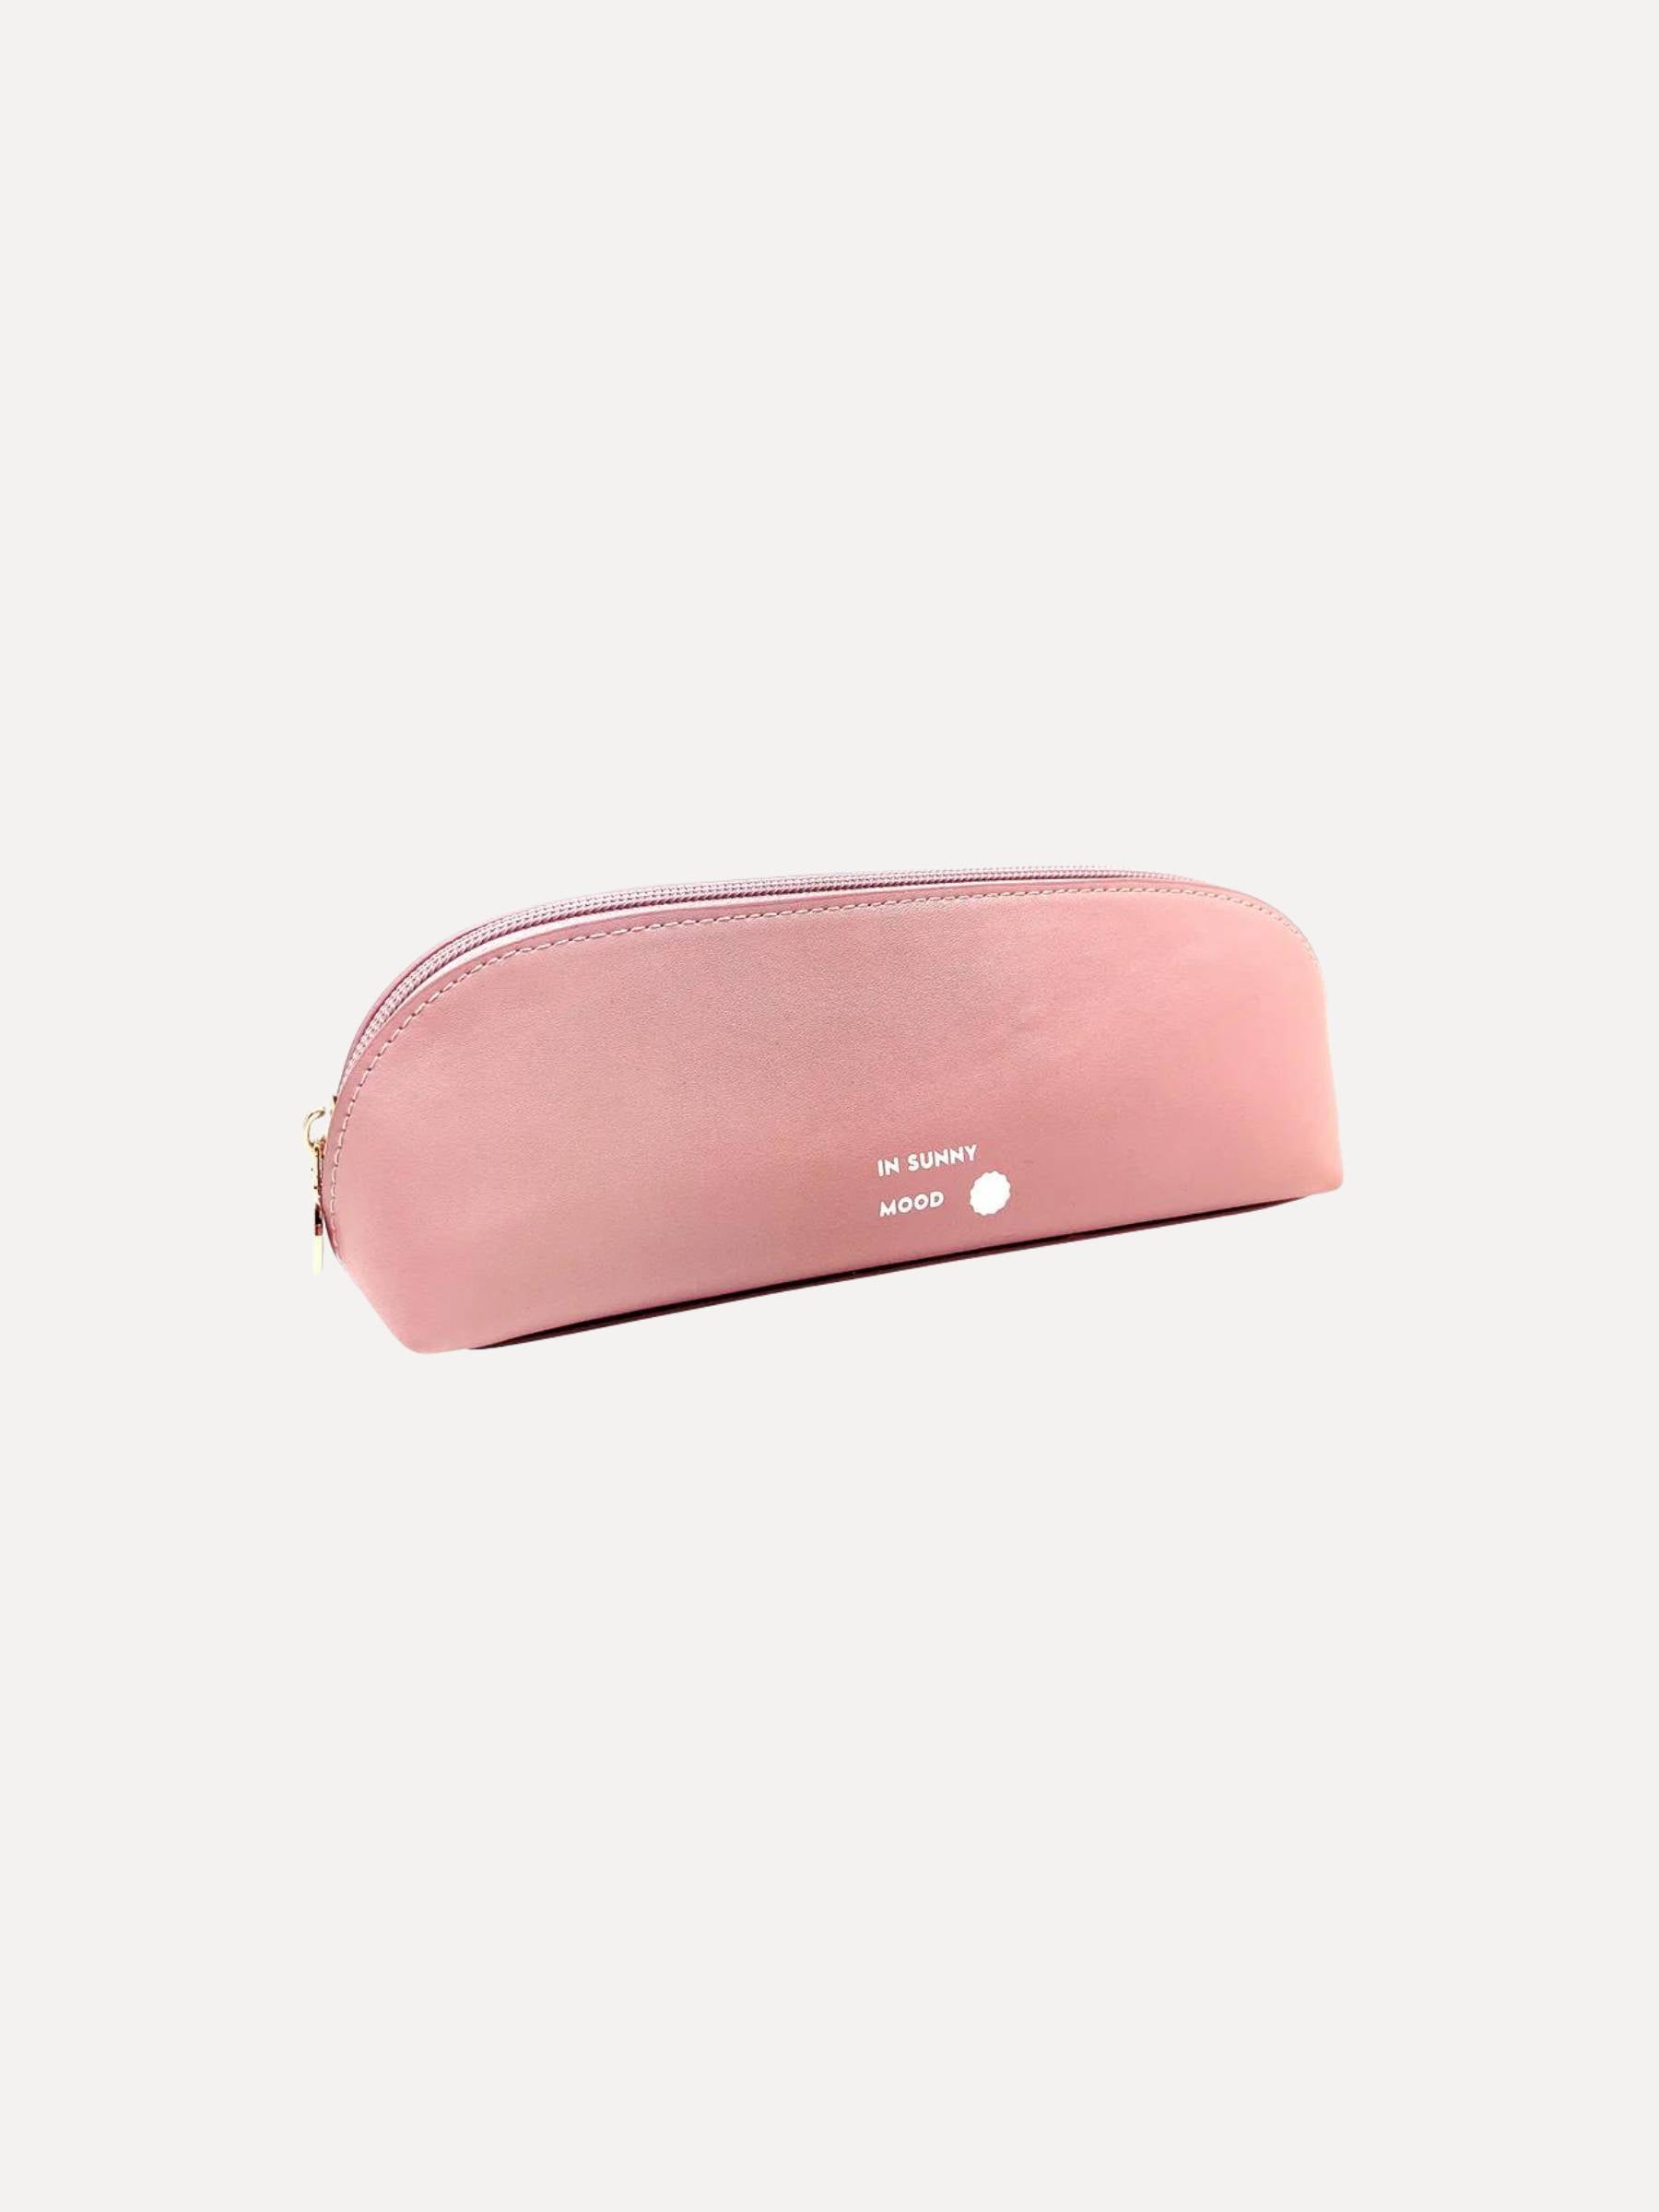 SUNNY Pencil Case Small, Dusty Pink